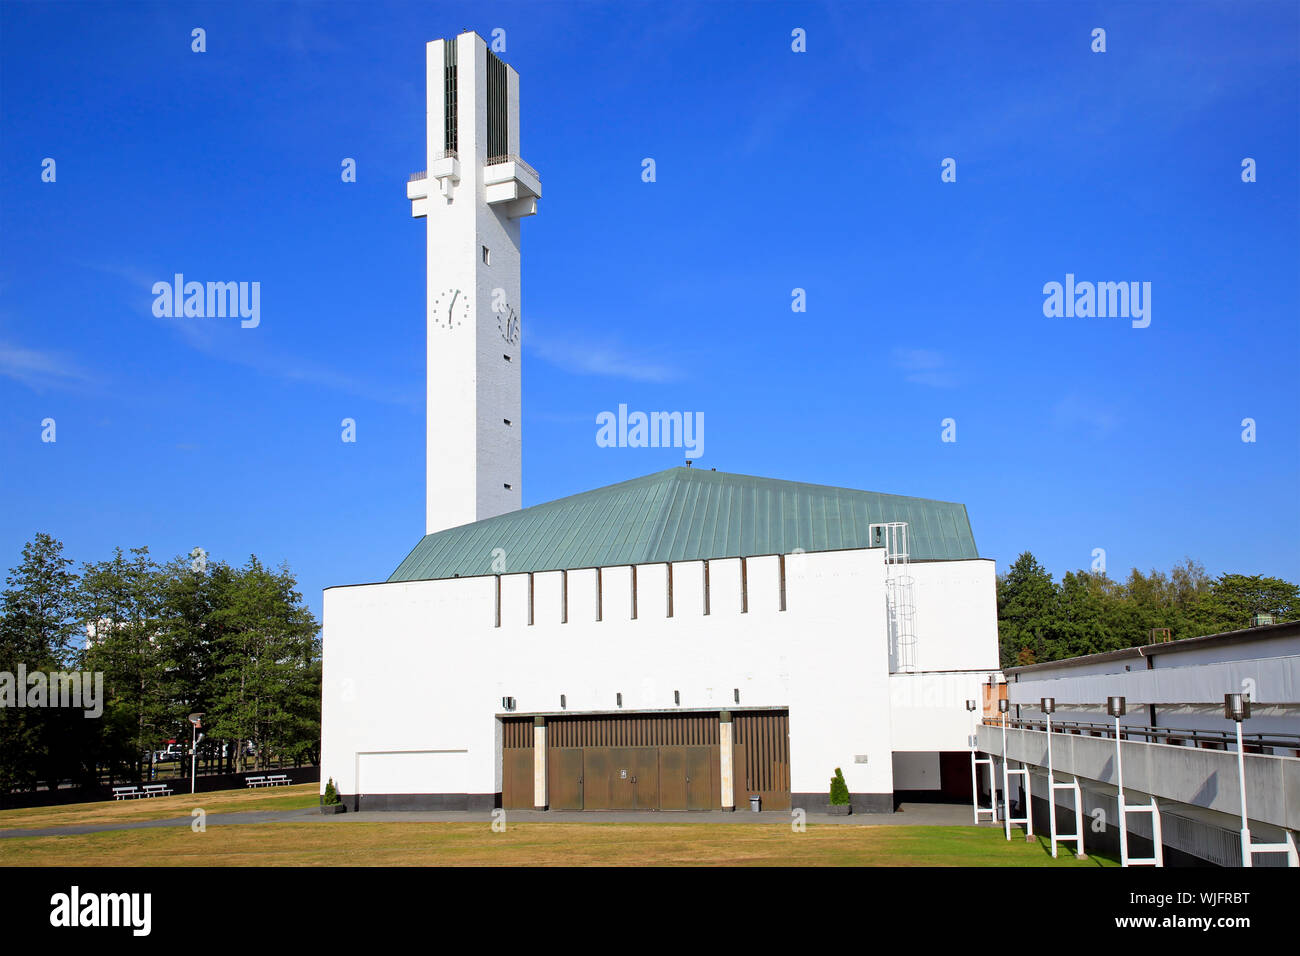 Lakeuden Risti church and 65 meters high cross-shaped bell tower designed by Alvar Aalto. Built 1957–1960. Seinajoki, Finland. August 10, 2019. Stock Photo